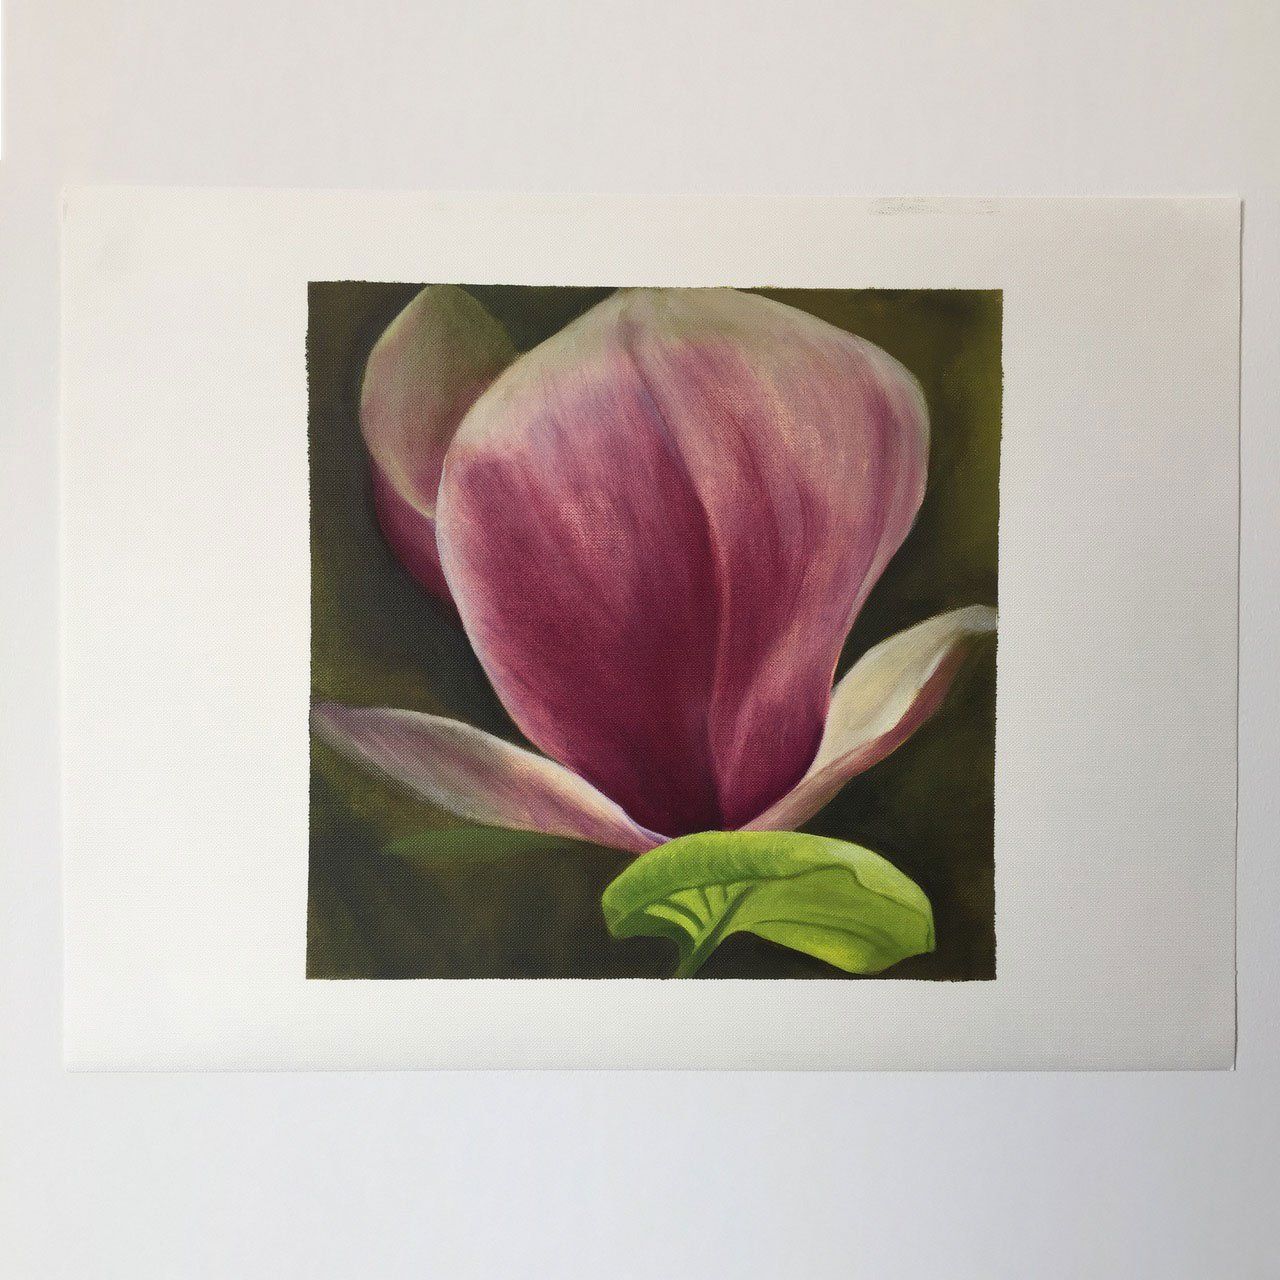 Magnolia Study IV, 2016, Oil on canvas , painting by Sarah Wood